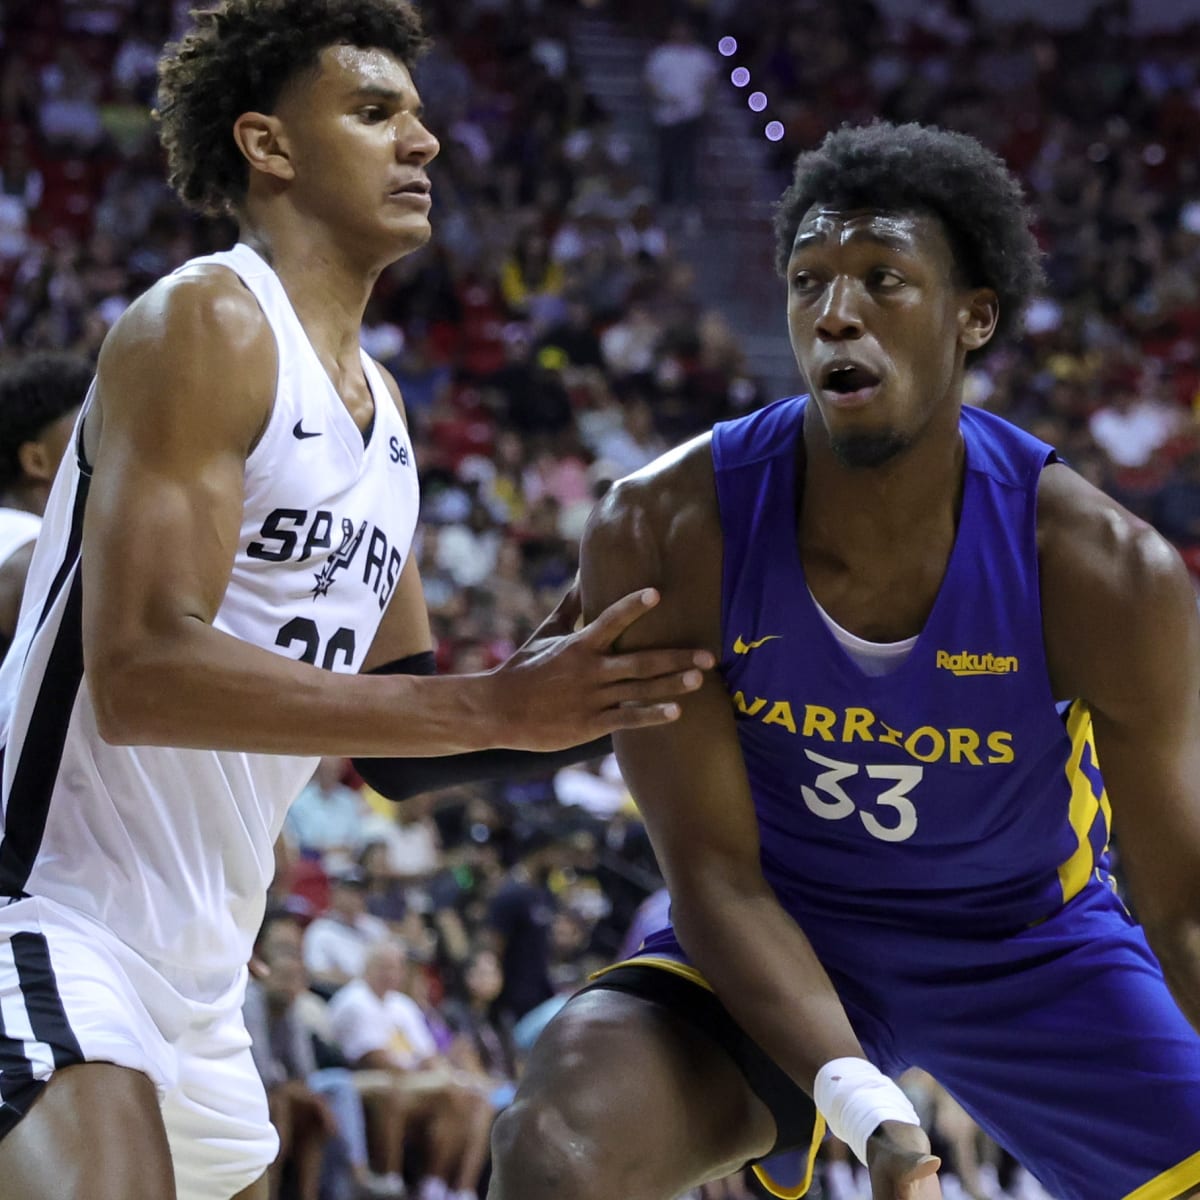 James Wiseman could start Warriors' season opener vs. Kevin Durant and Nets